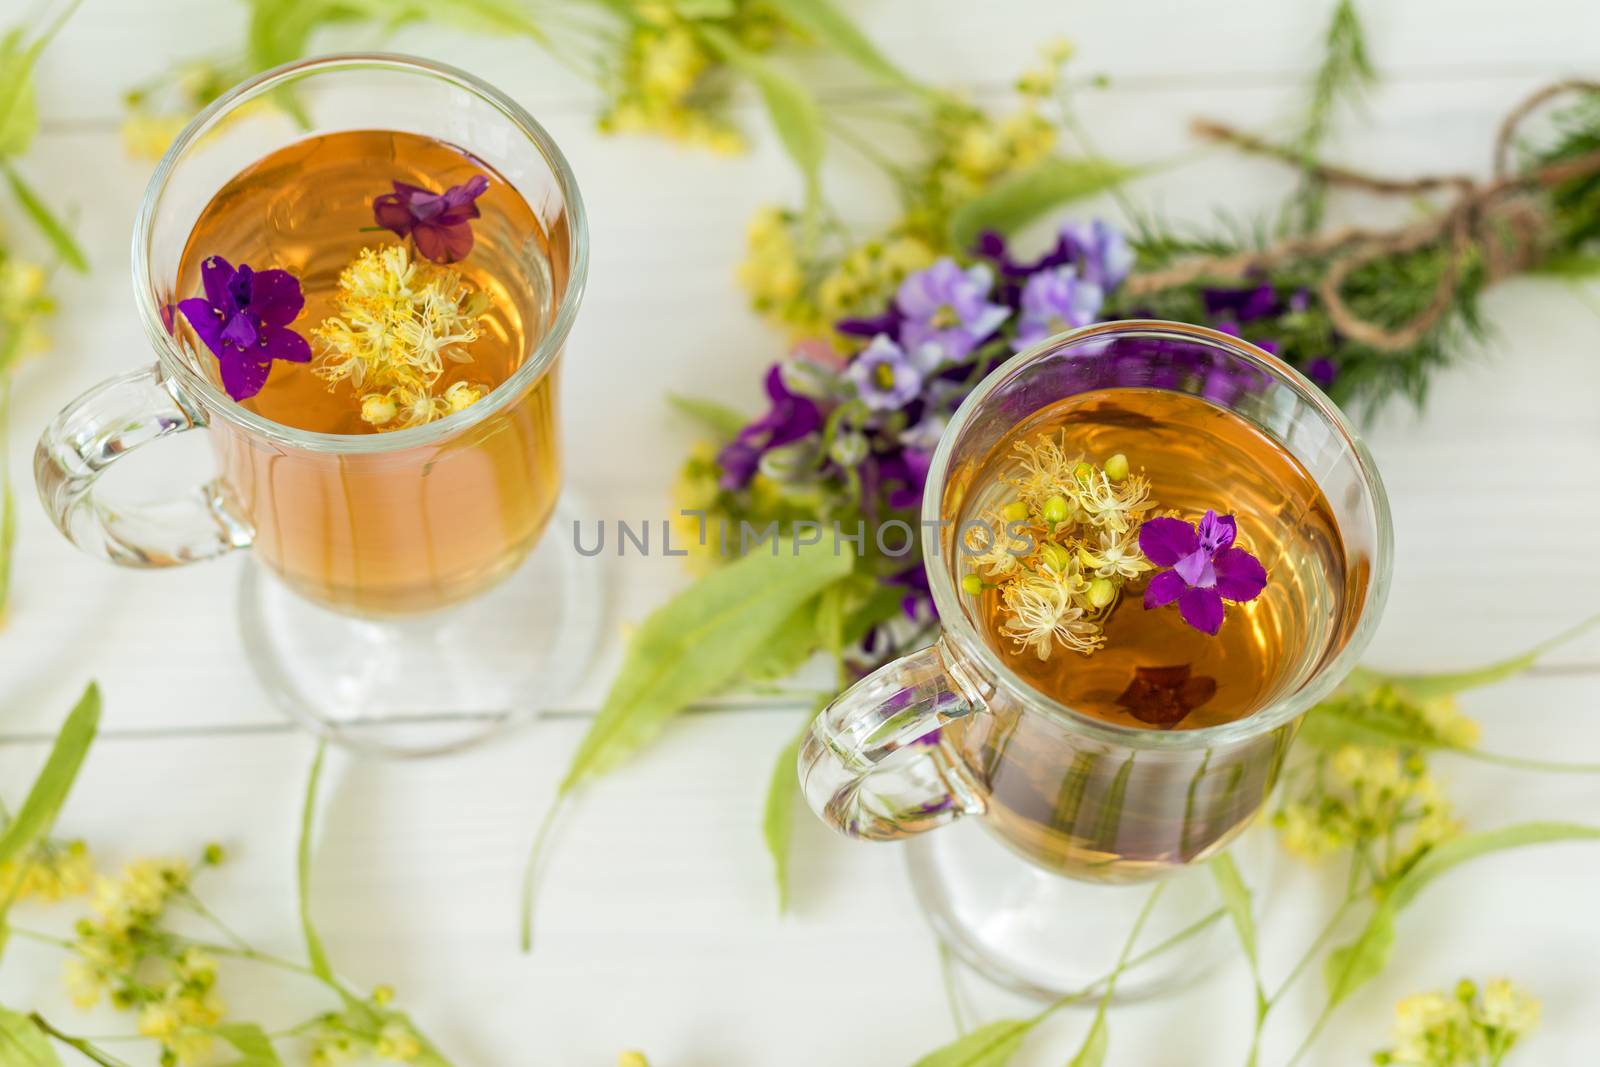 Linden herbal tea in a transparent grog glass with a linden blossom and bunch of herbs on the white wooden surface